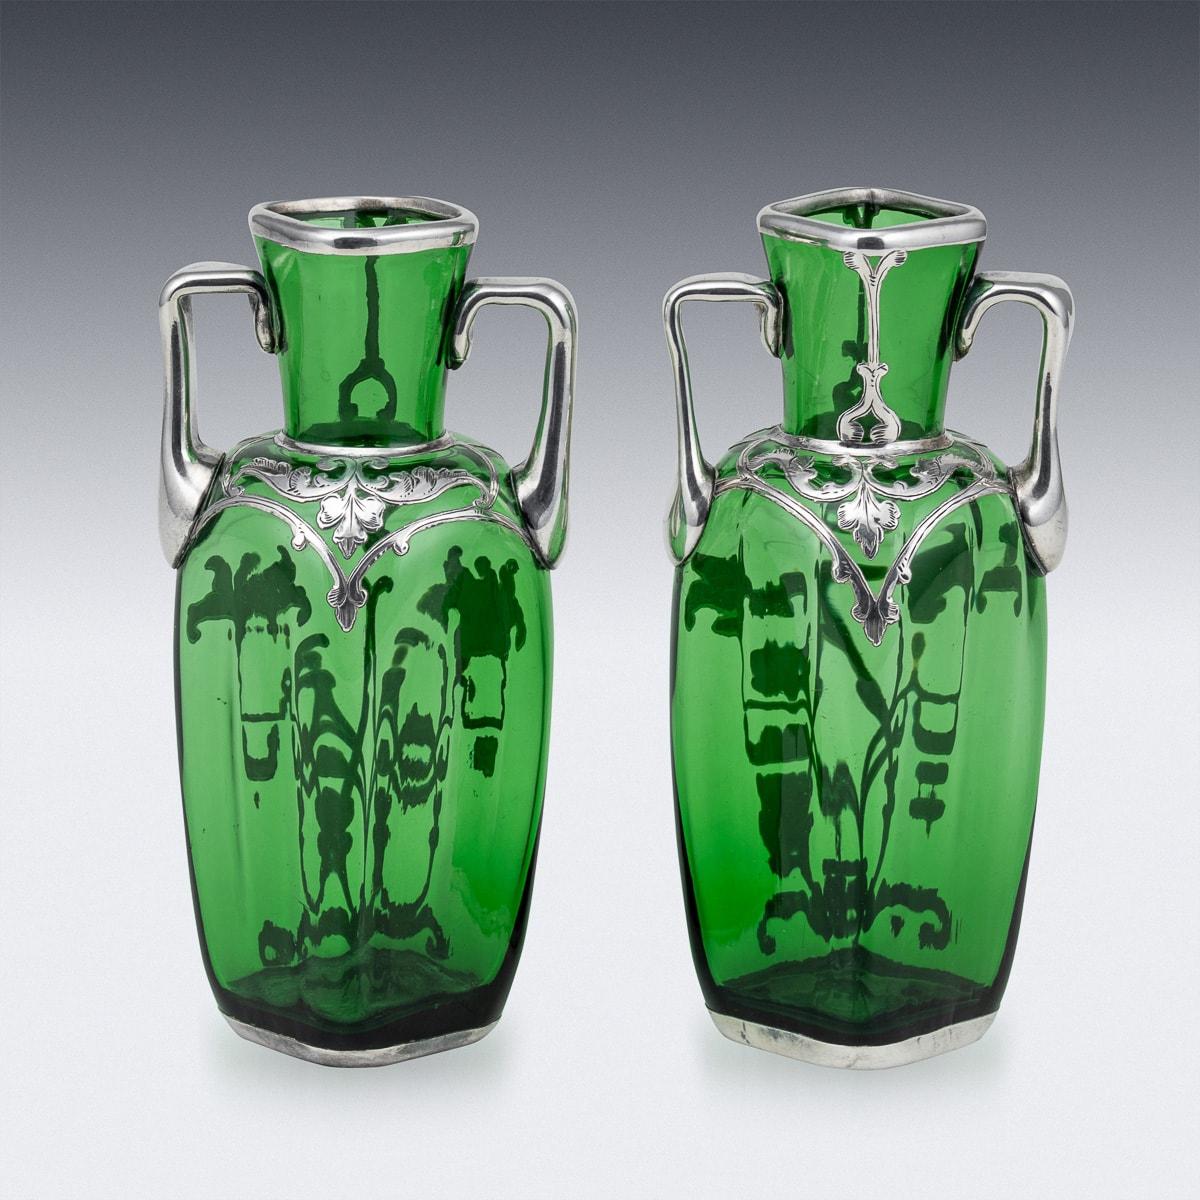 20th Century American Pair Of Green Glass Vases With Silver Overlay c.1920 In Good Condition For Sale In Royal Tunbridge Wells, Kent